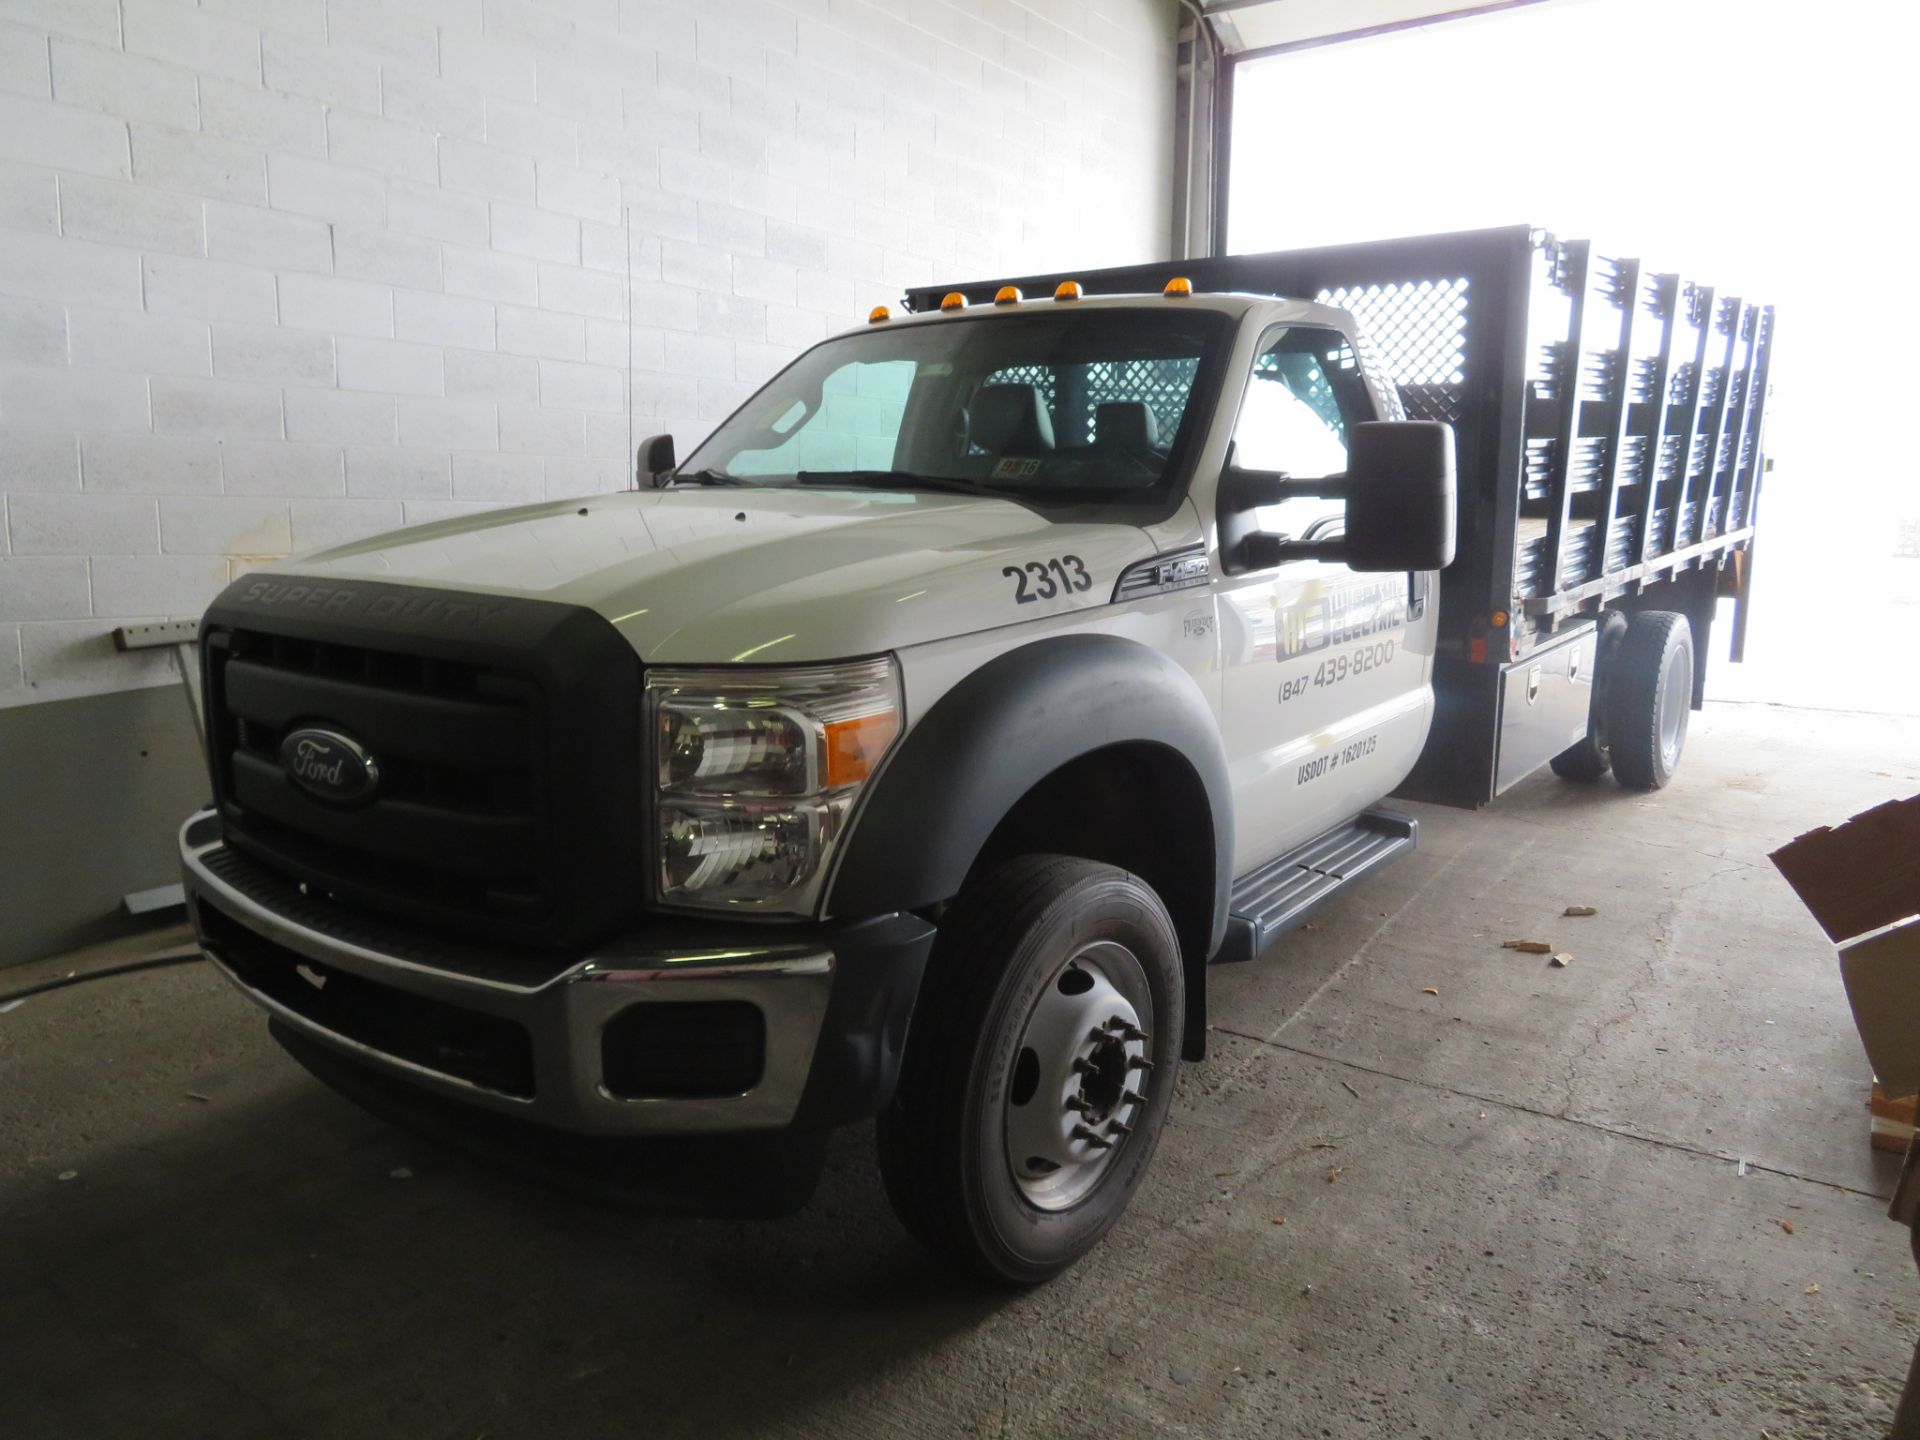 2012 Ford F-450 Super Duty 14 ft. Stake Bed Truck, VIN 1FDTF4GYXCED00078, Gas, Automatic, Anthony